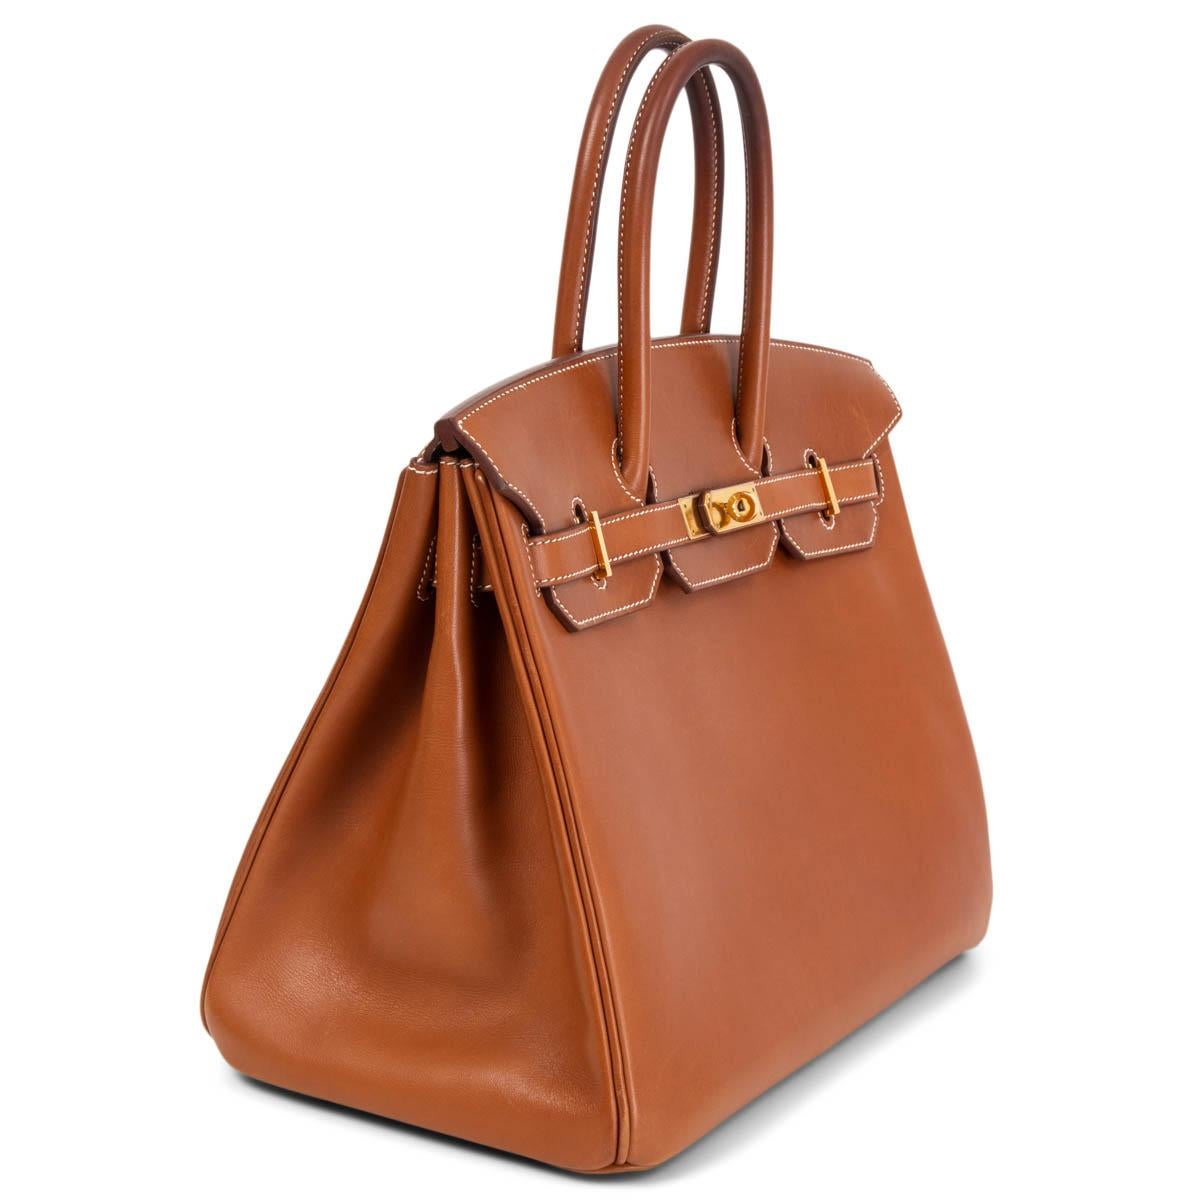 100% authentic Hermès 'Birkin 35' bag in Fauve (cognac brown) Barenia leather with contrasting white stitching and gold-plated hardware. Rare chance to get your hands on the coveted Barenia Birkin - this leather will developed a beautiful patina